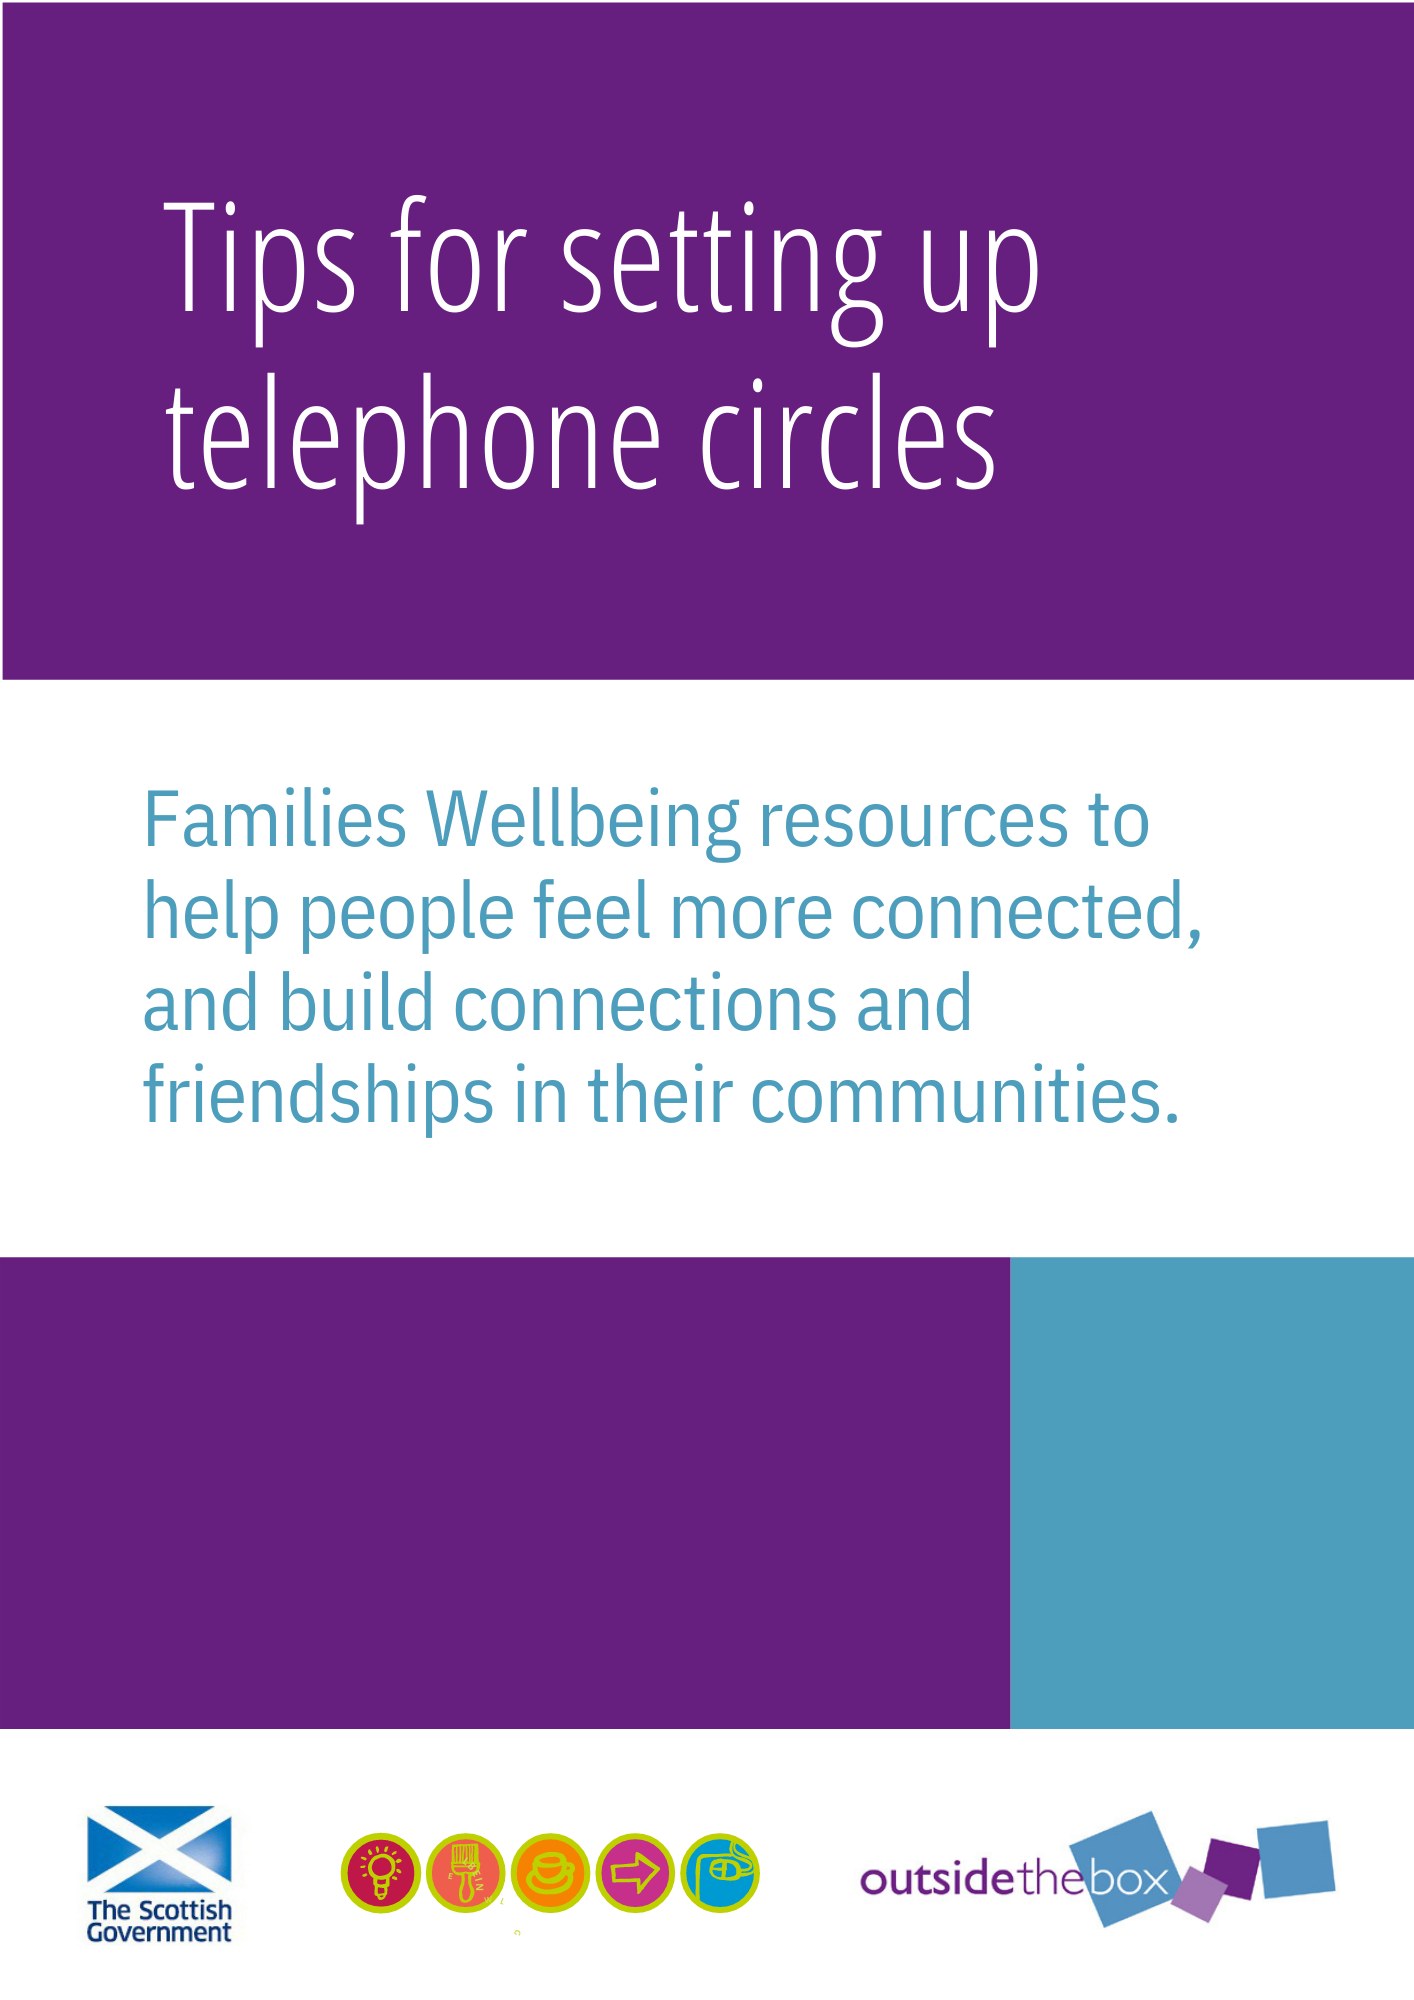 Tips for setting up telephone circles. Families Wellbeing resources to help people feel more connected, and build connections and friendships in their communities.